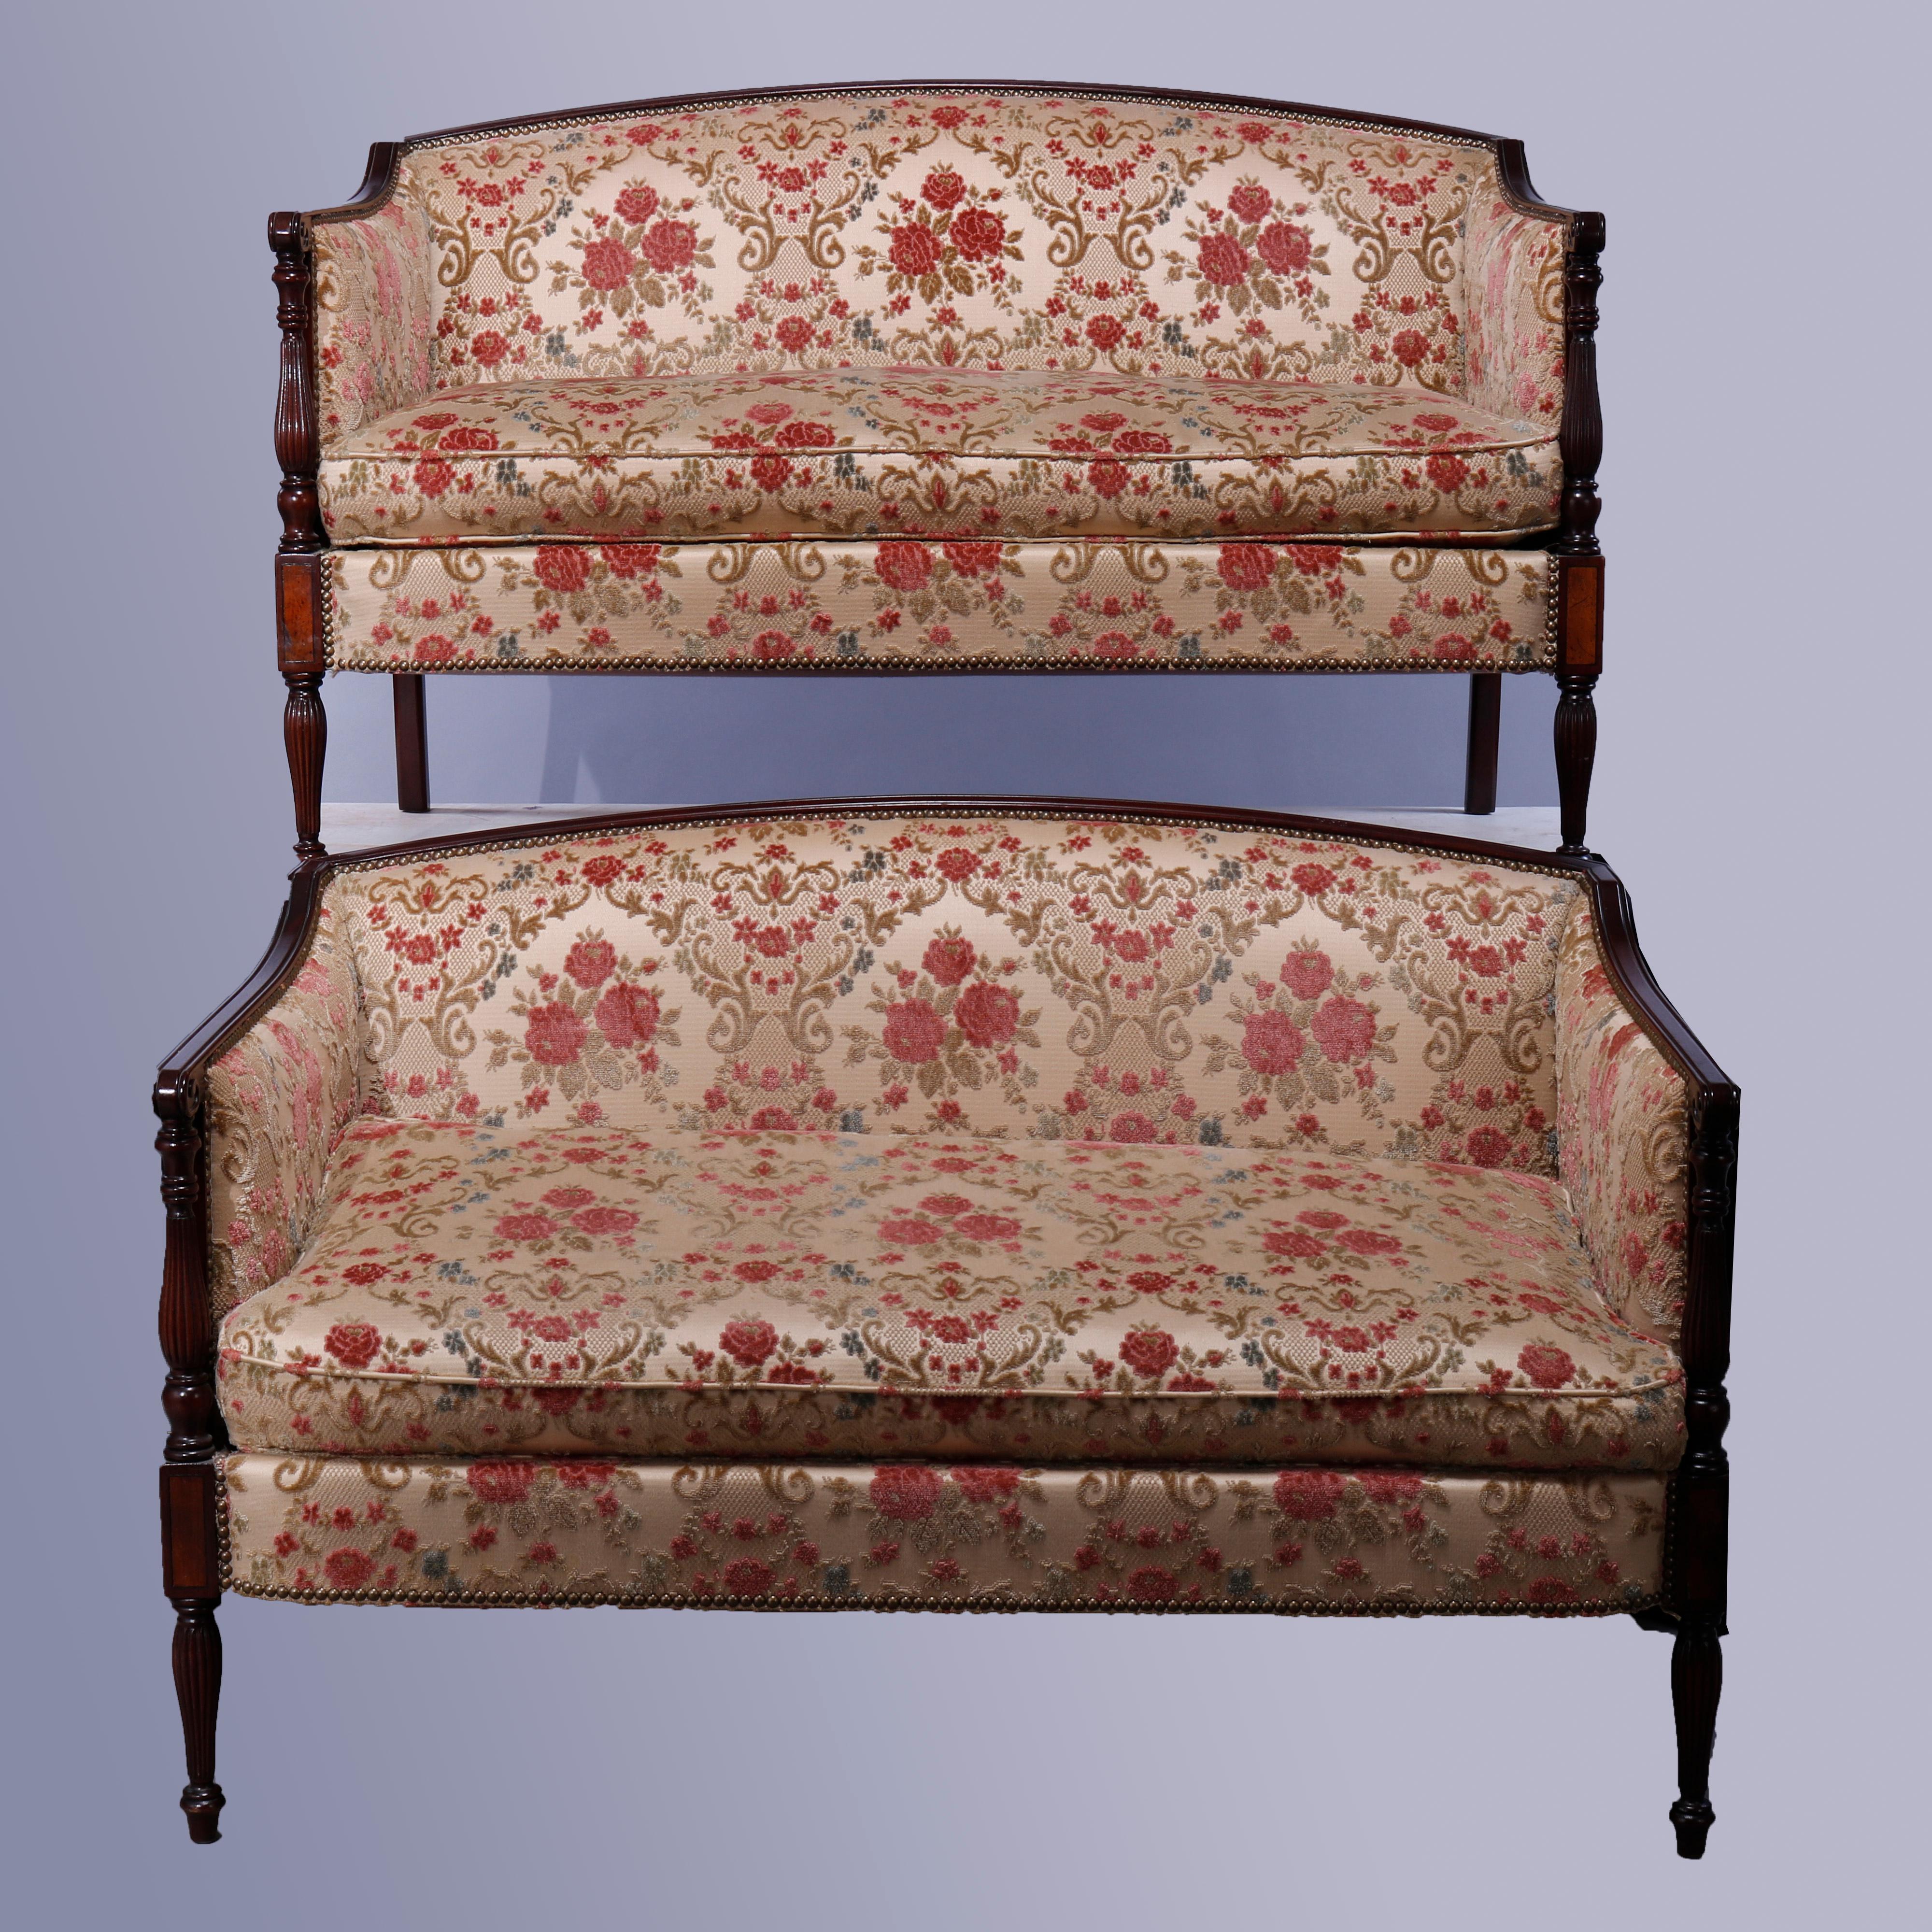 An antique pair of matching Sheraton style settees by Lane Hickory Chair Co. offer mahogany construction with arched backs surmounting upholstered backs and seats flanked by scroll form arms with turned and reeded balustrade supports with satinwood